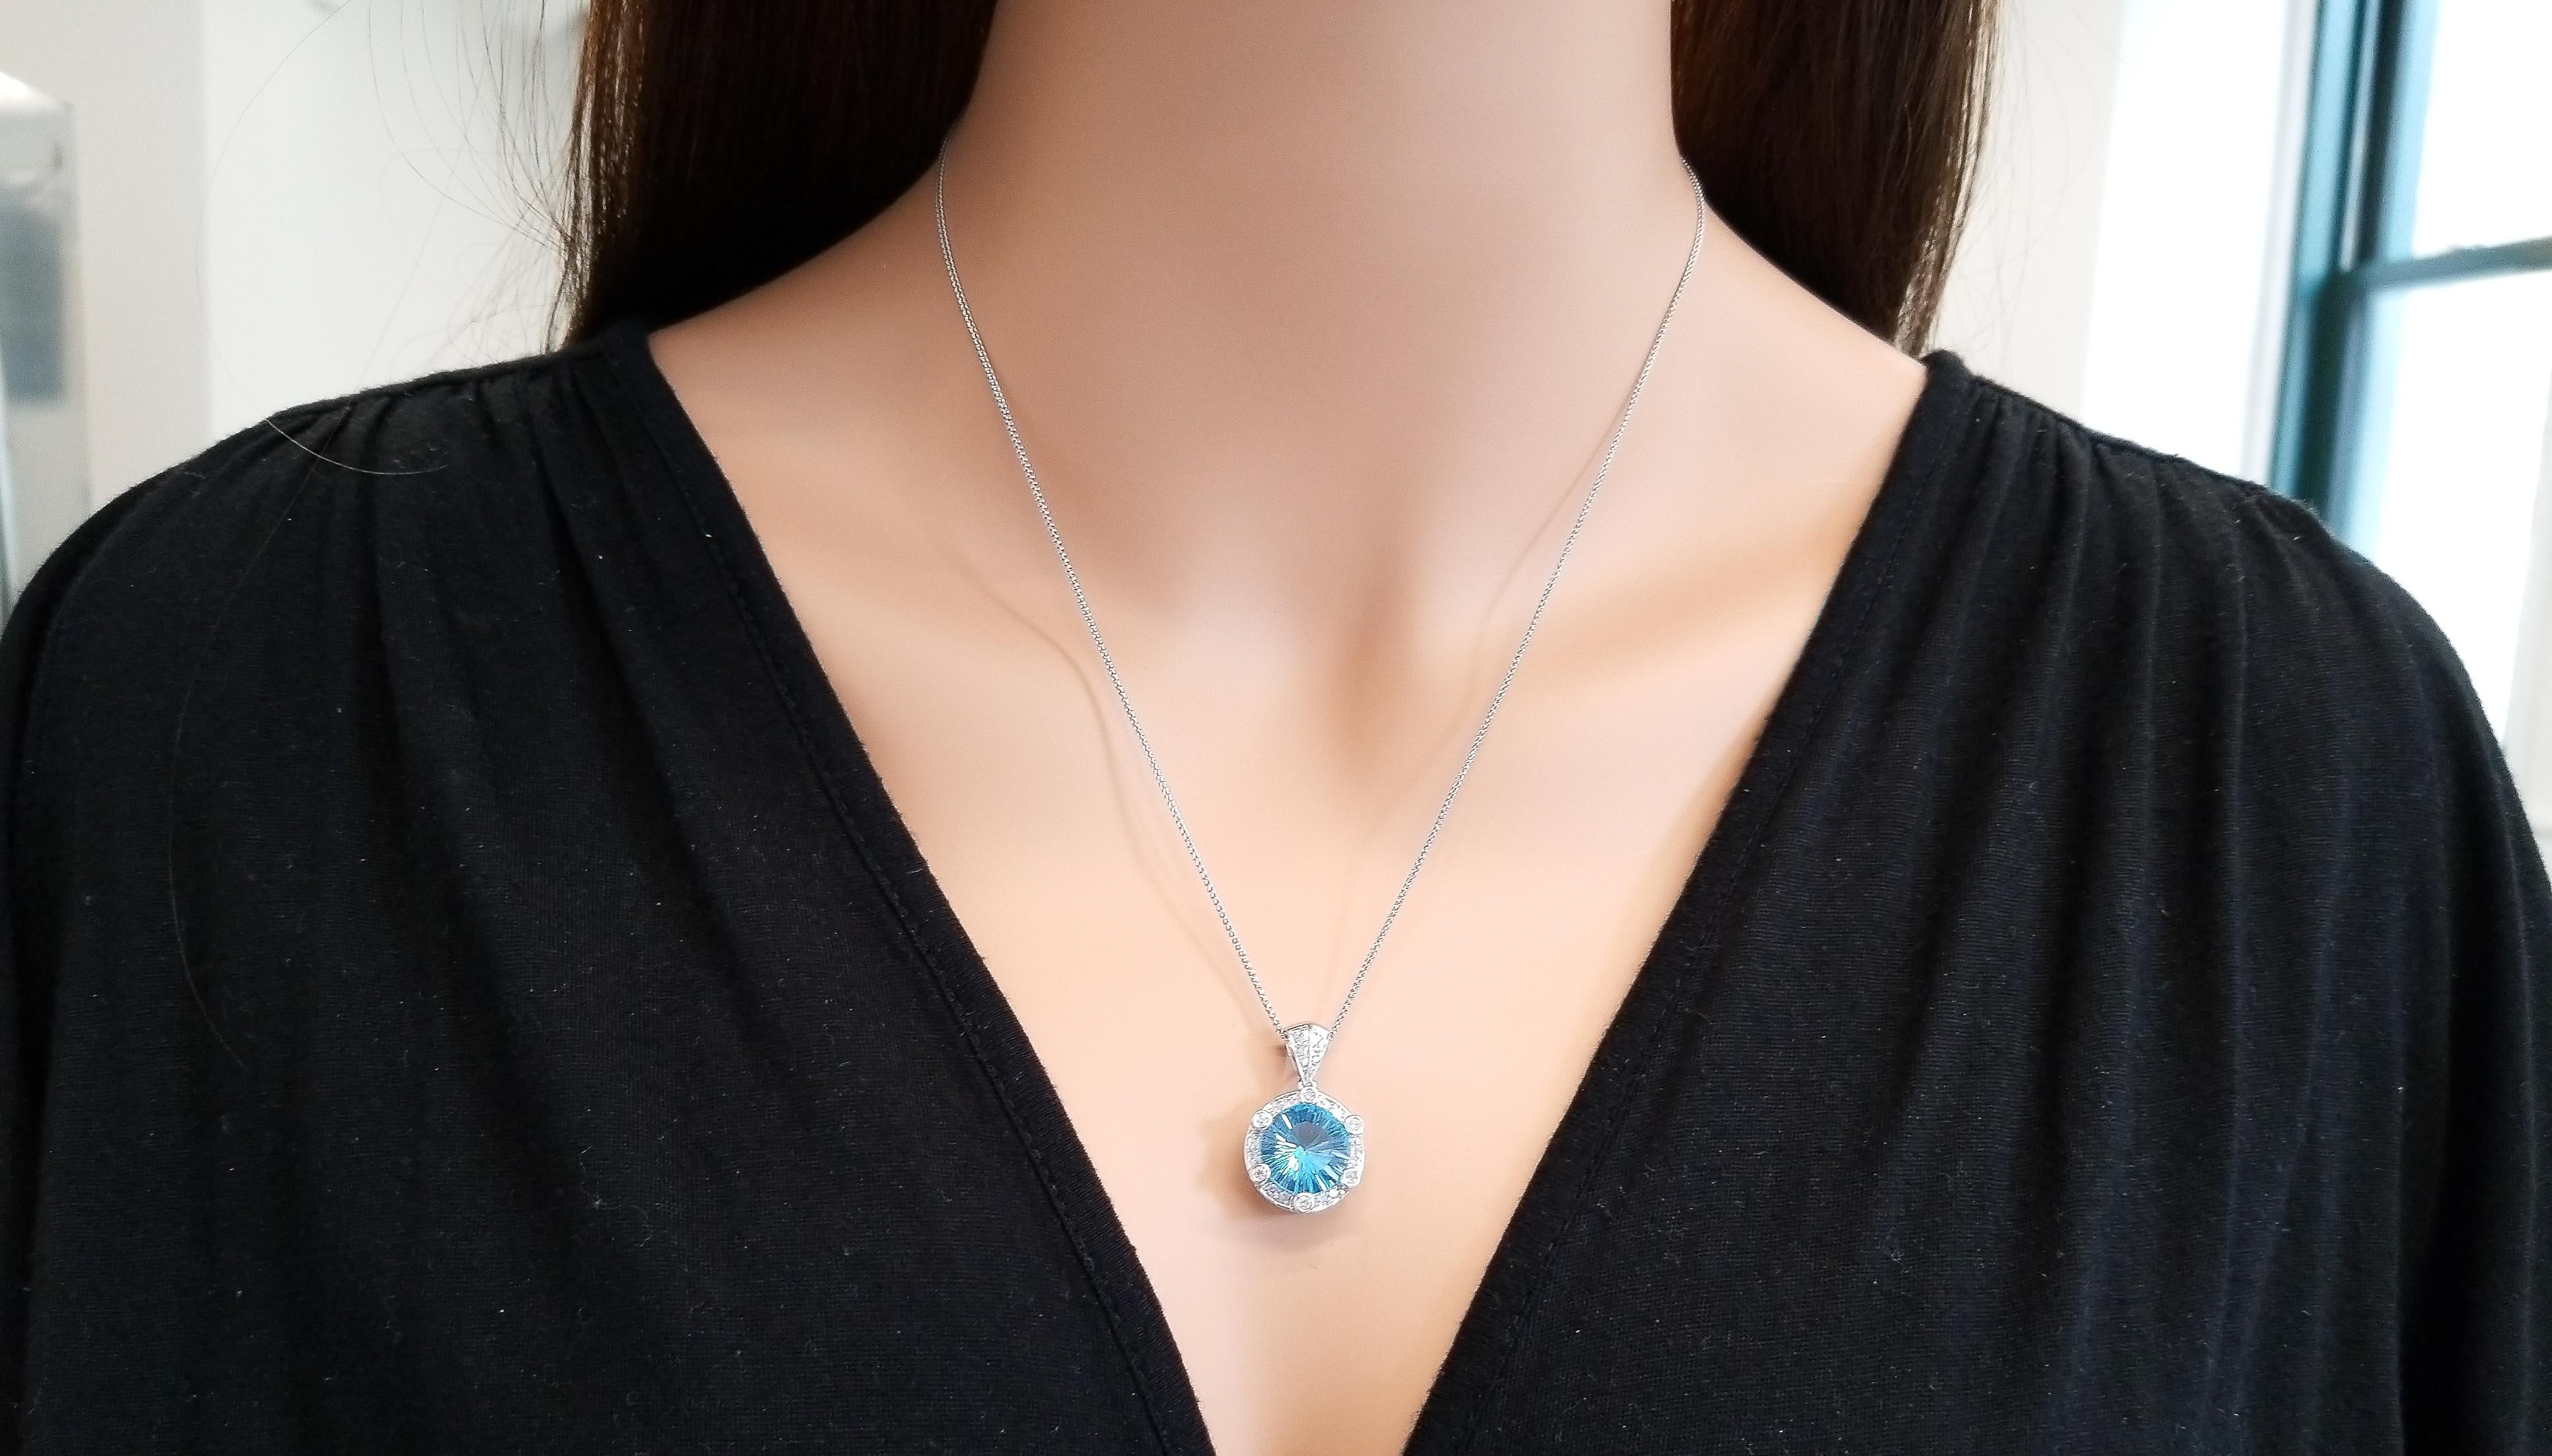 Reminiscent of a bright blue sky, this is a gorgeous Swiss blue topaz necklace. A 6.05 carat round fantasy cut Swiss blue topaz is prong set and skillfully cut with a starburst pavilion. Its gem source is Brazil and measures 11.50mm round. Its